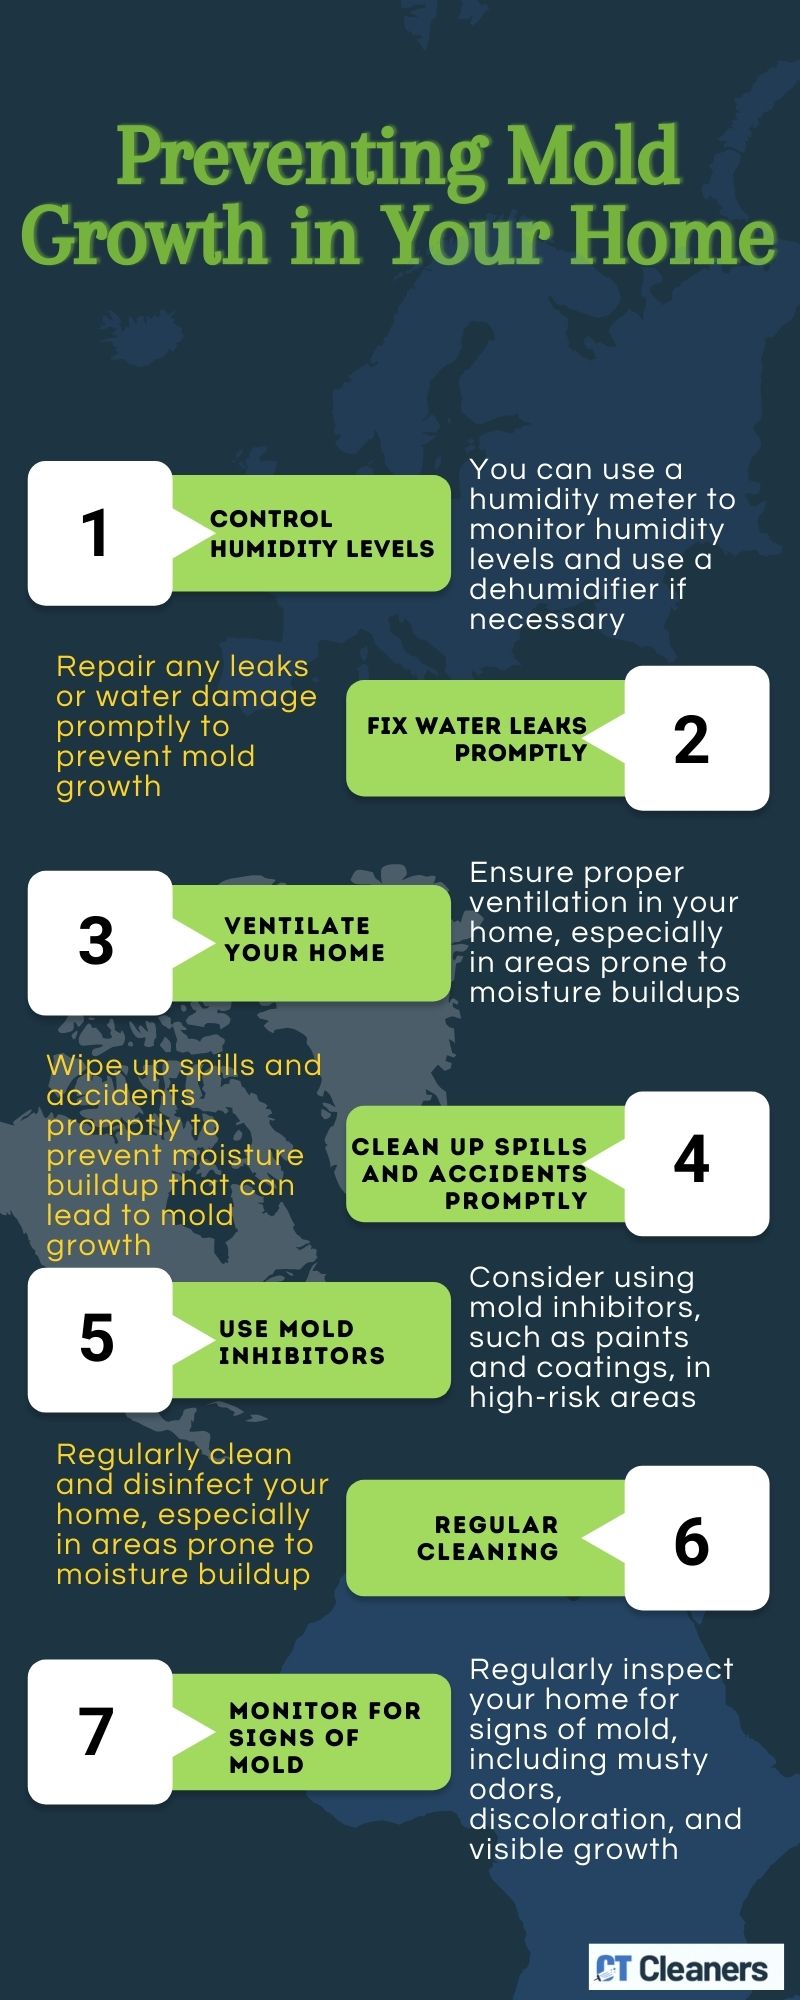 Preventing Mold Growth in Your Home